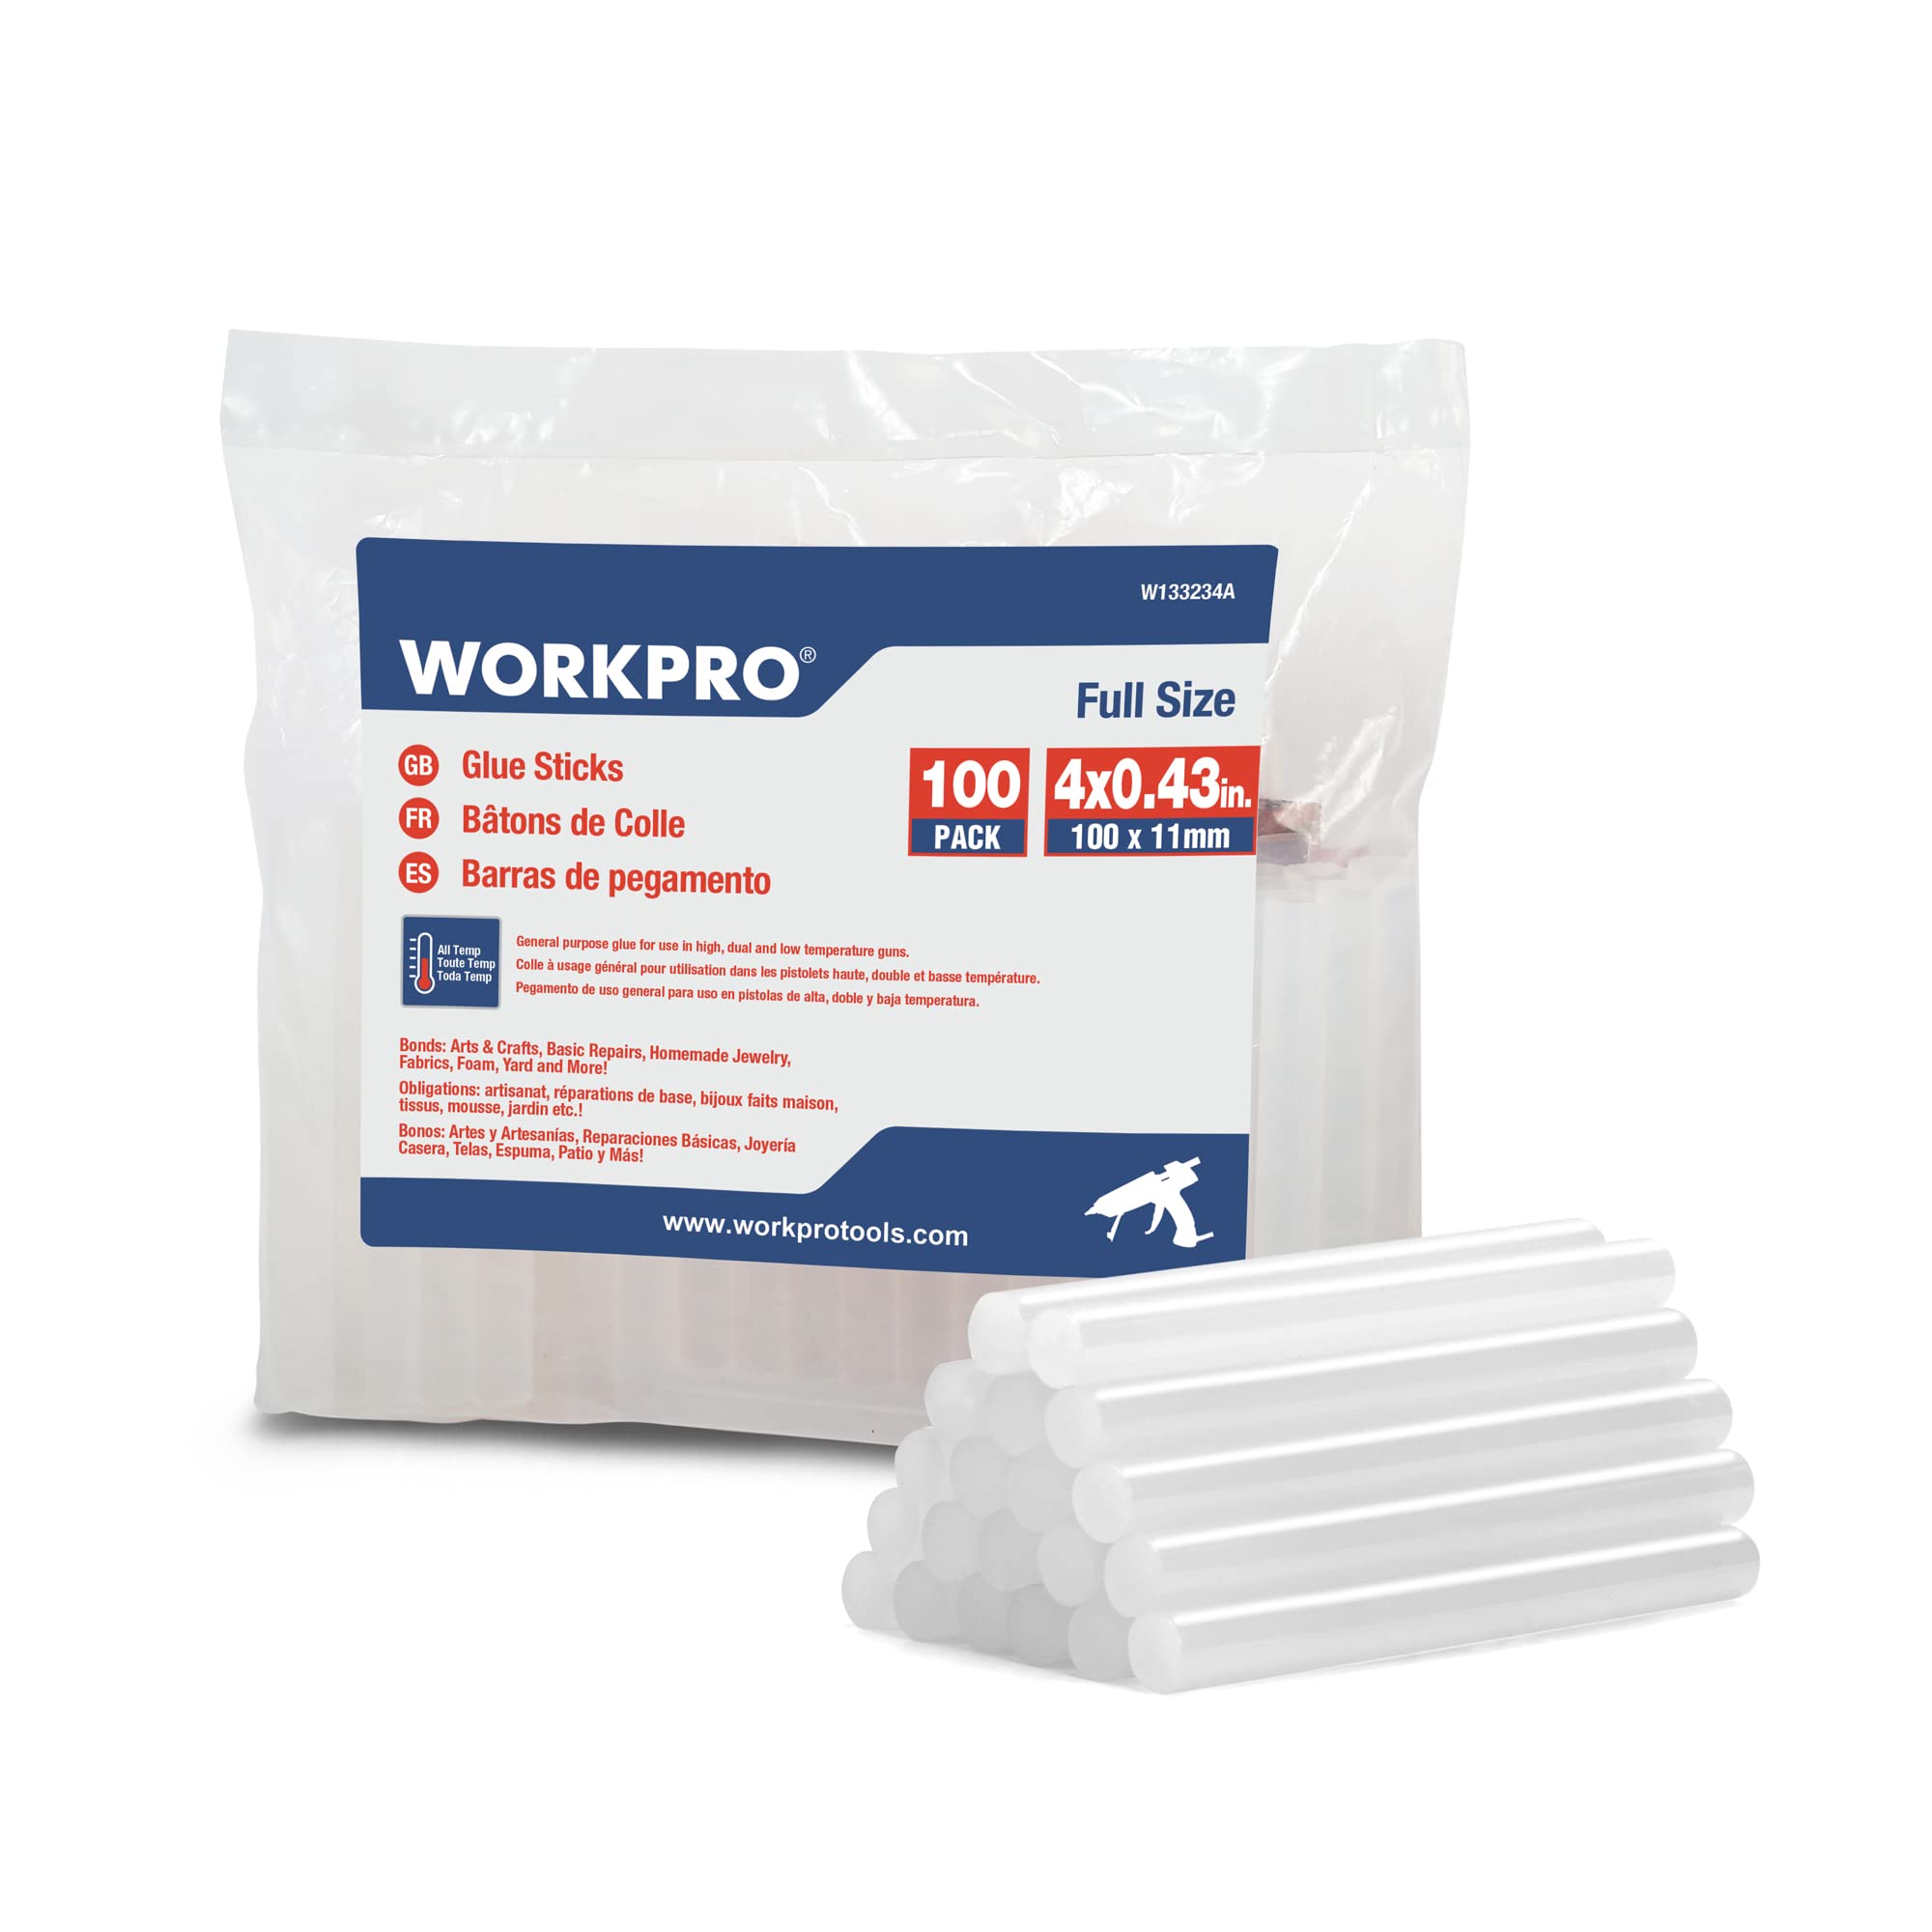 WORKPRO Full Size Hot Glue Sticks, 100-pack, 0.43x4 Inches